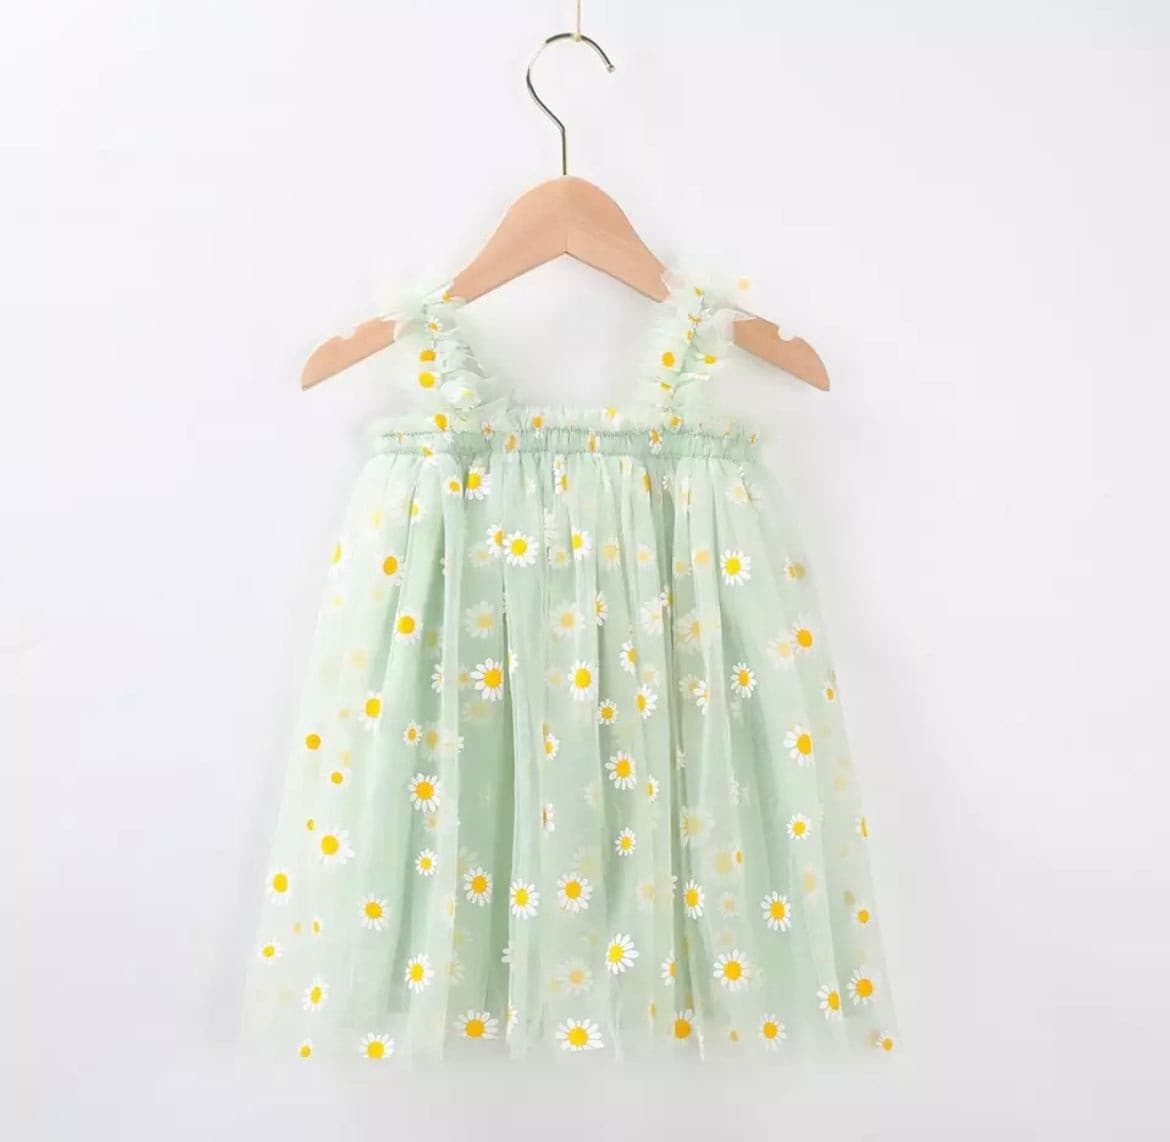 Girls Tulle Tutu Dress with Daisies - Vintage Mint.